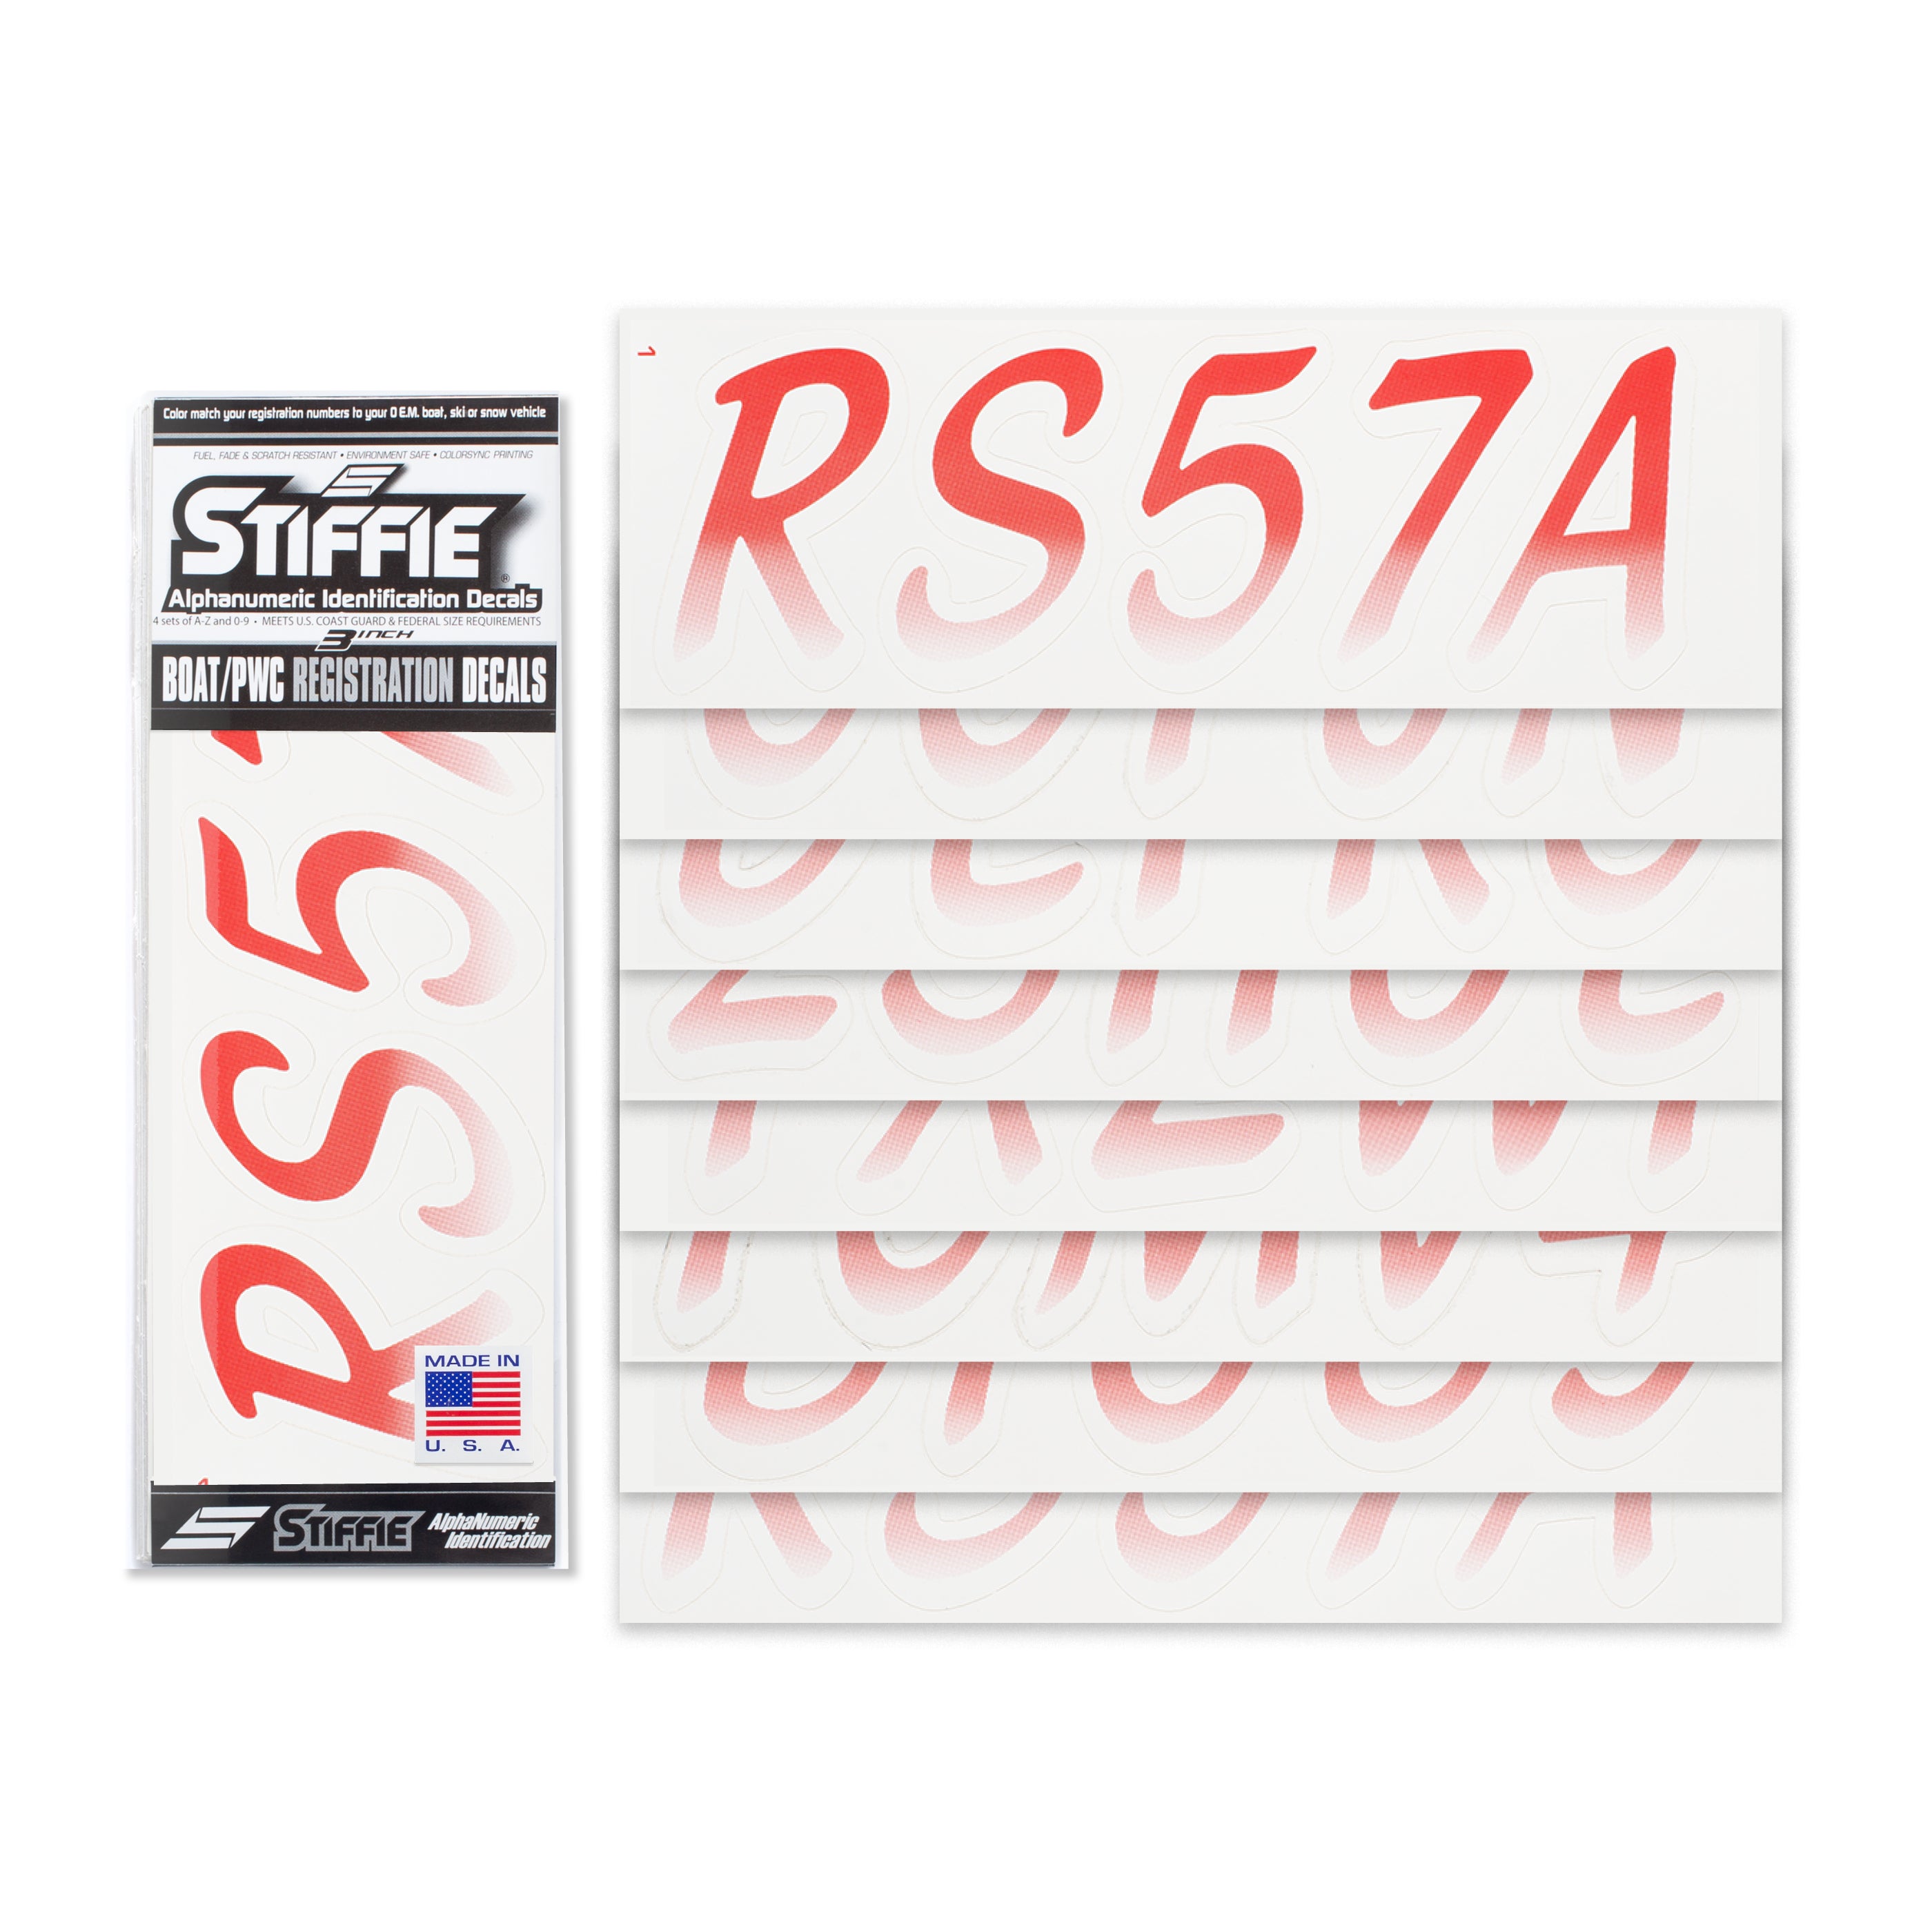 STIFFIE Whipline Red/White 3" Alpha-Numeric Registration Identification Numbers Stickers Decals for Boats & Personal Watercraft